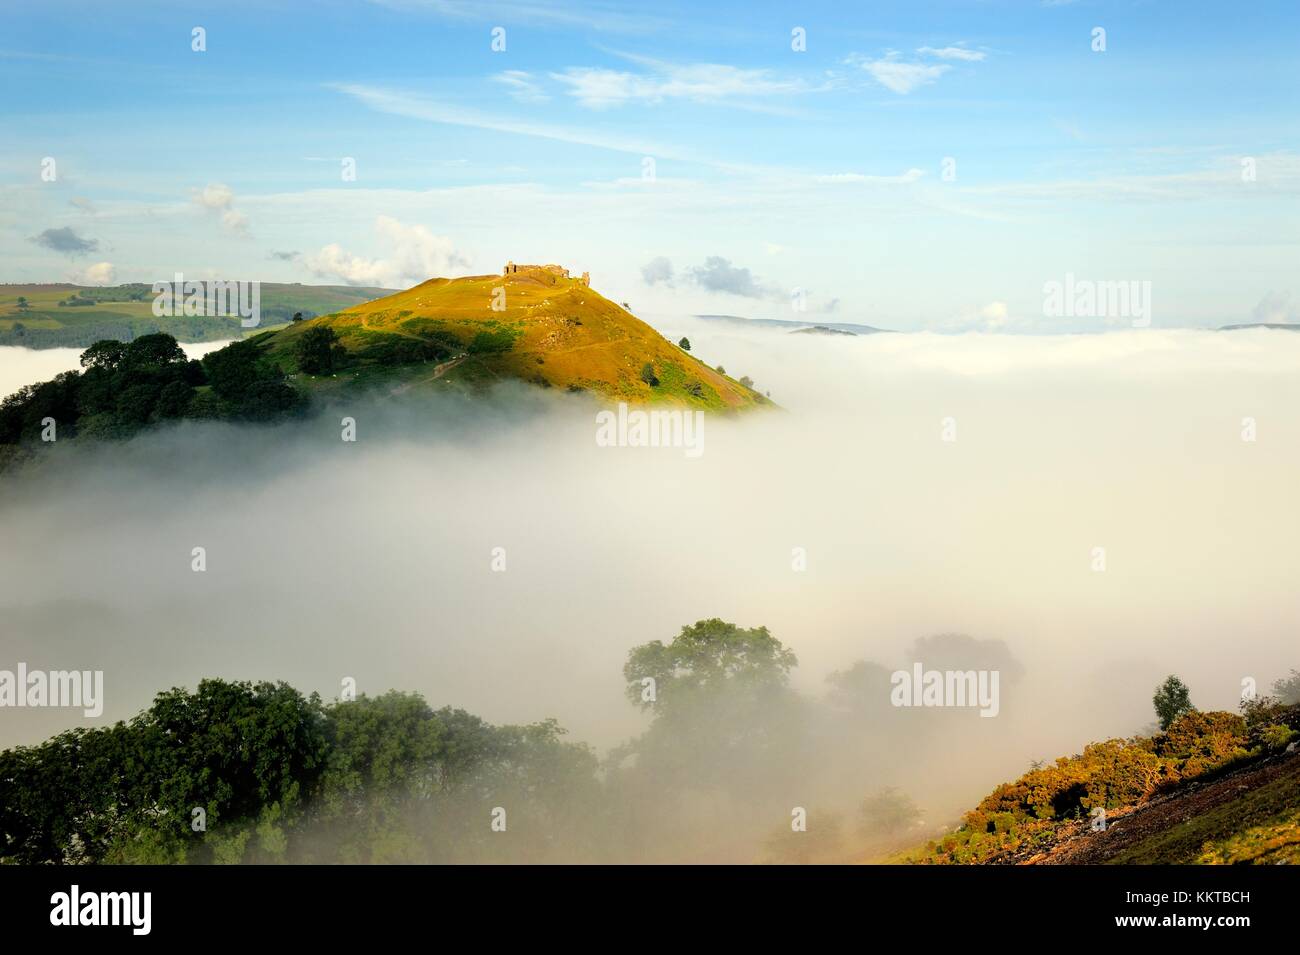 Castell Dinas Bran, Llangollen, Denbighshire, Wales. On an Iron Age site, the stone castle dates from 13 C. Summer morning mist Stock Photo